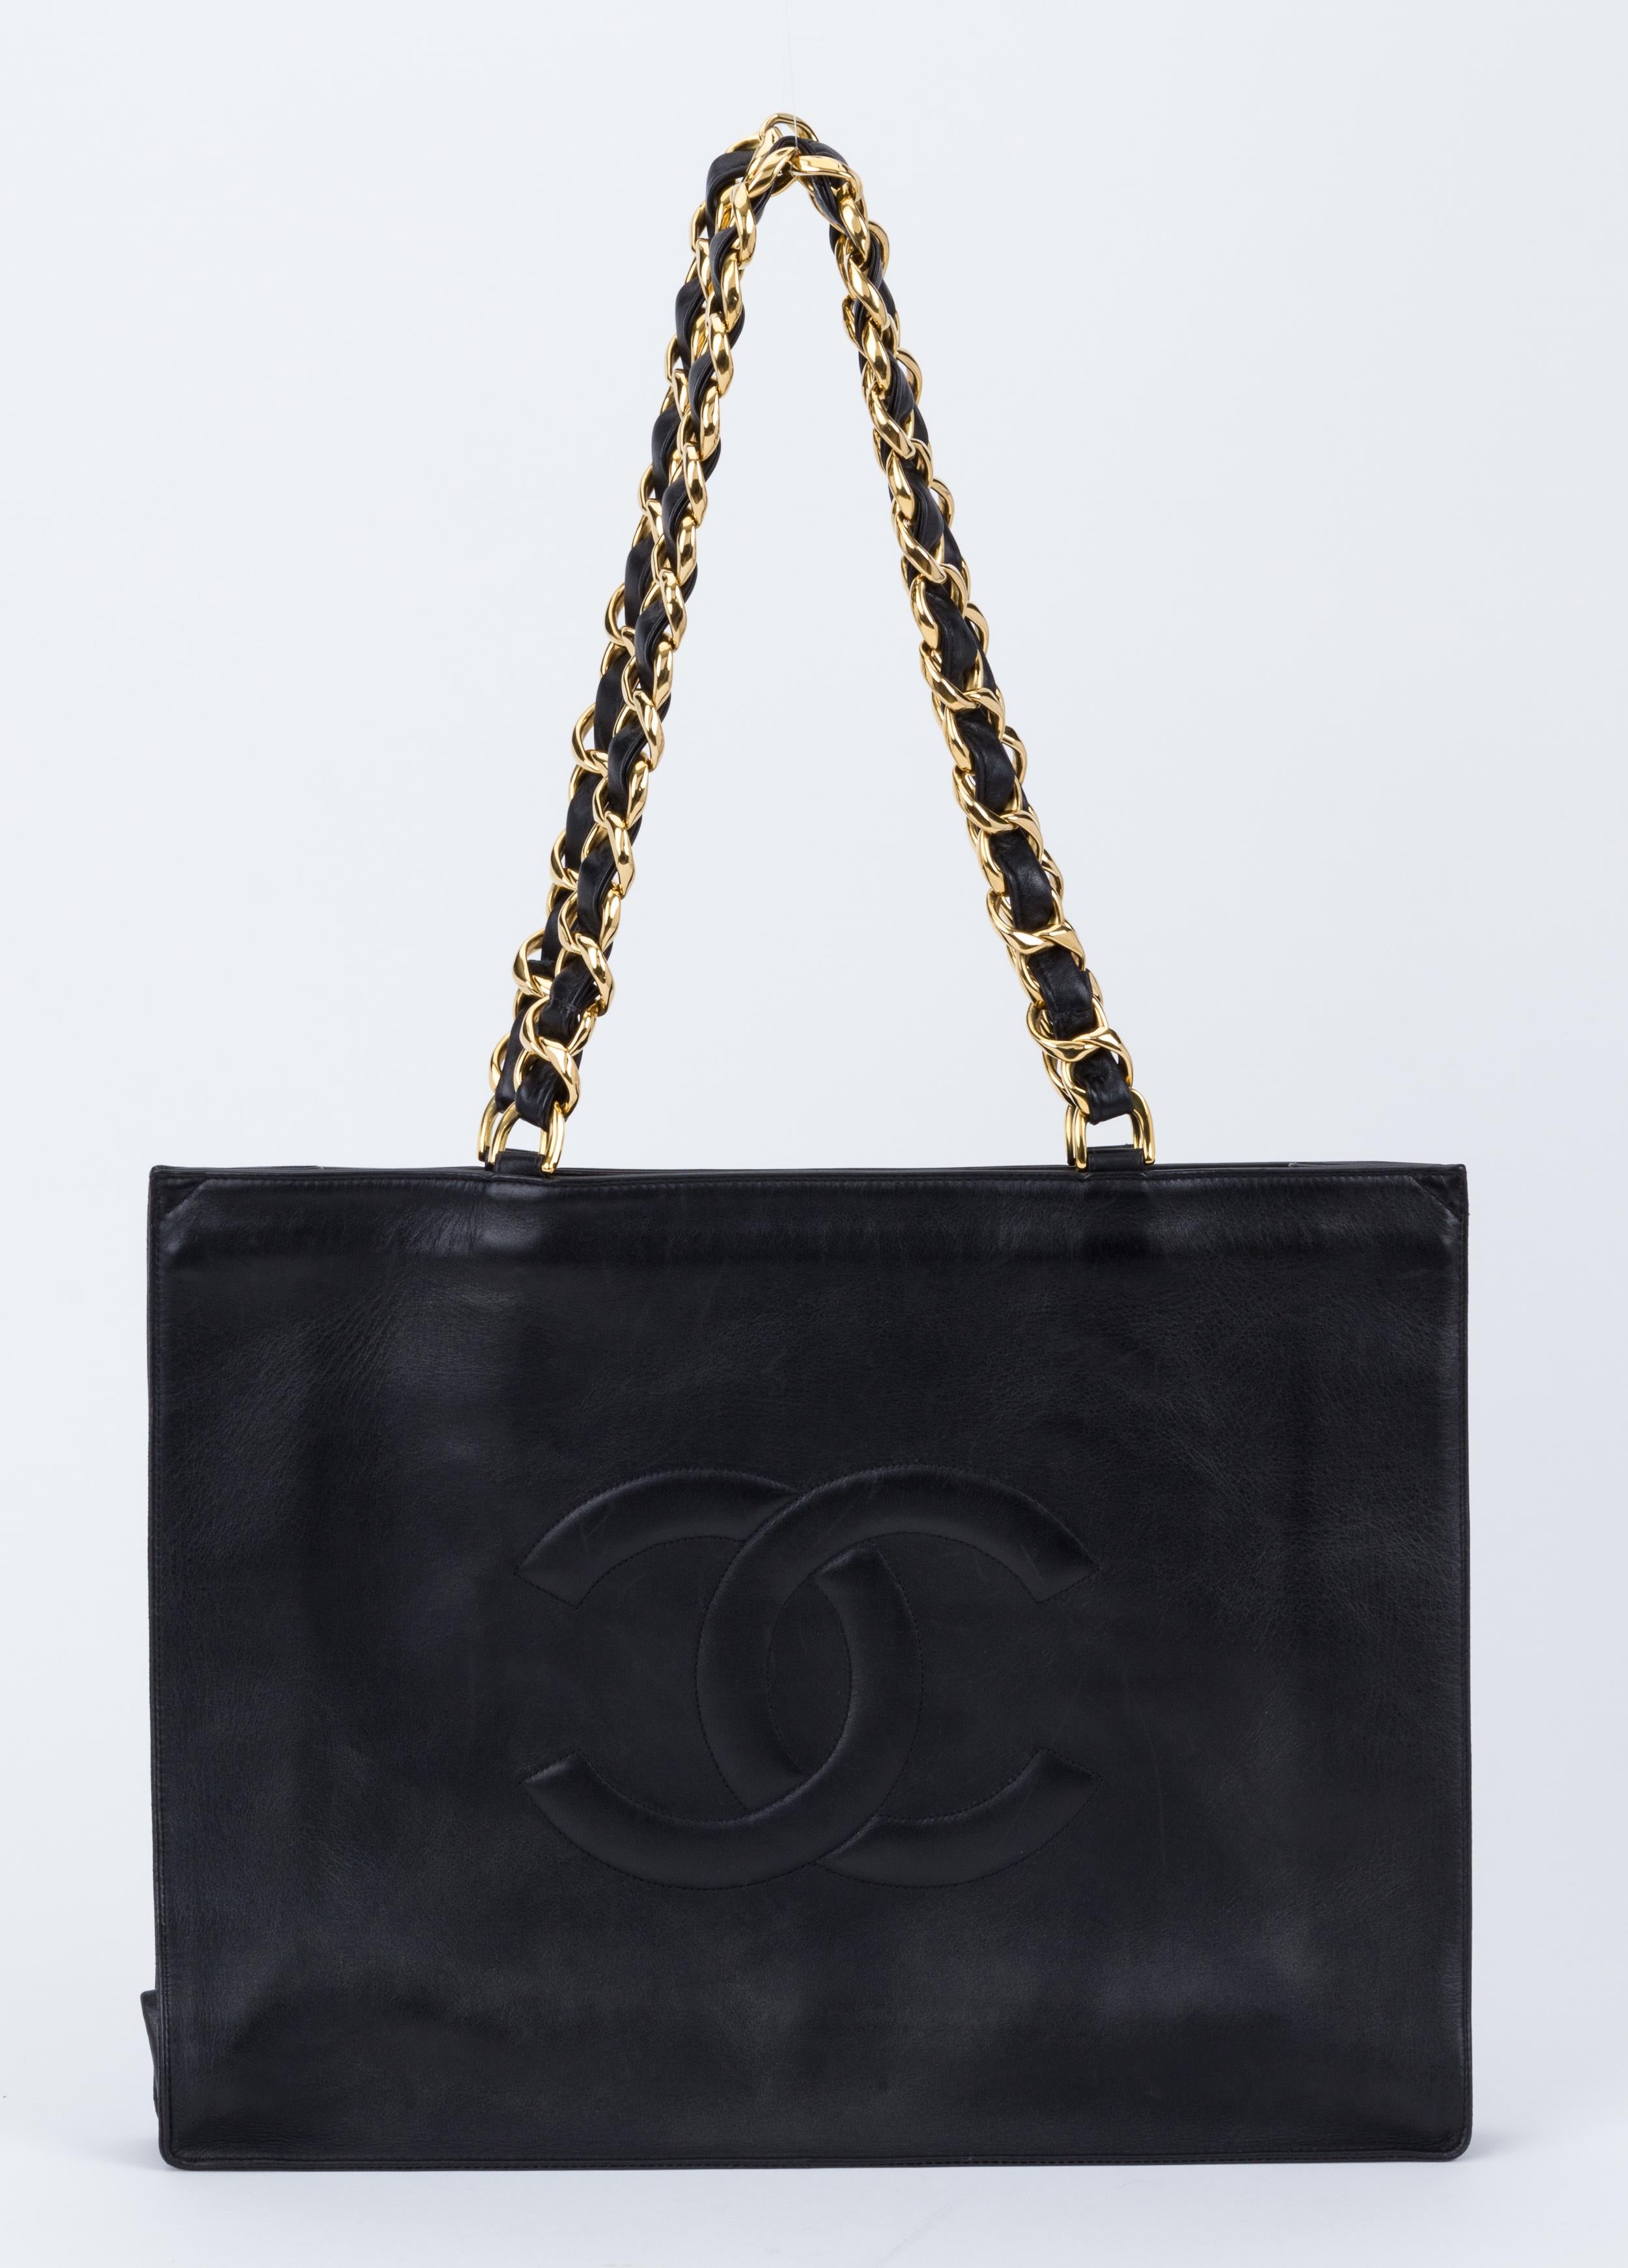 Chanel iconic black lambskin tote with oversized gold chain straps. Collection 1994/1996. Handle drop 12